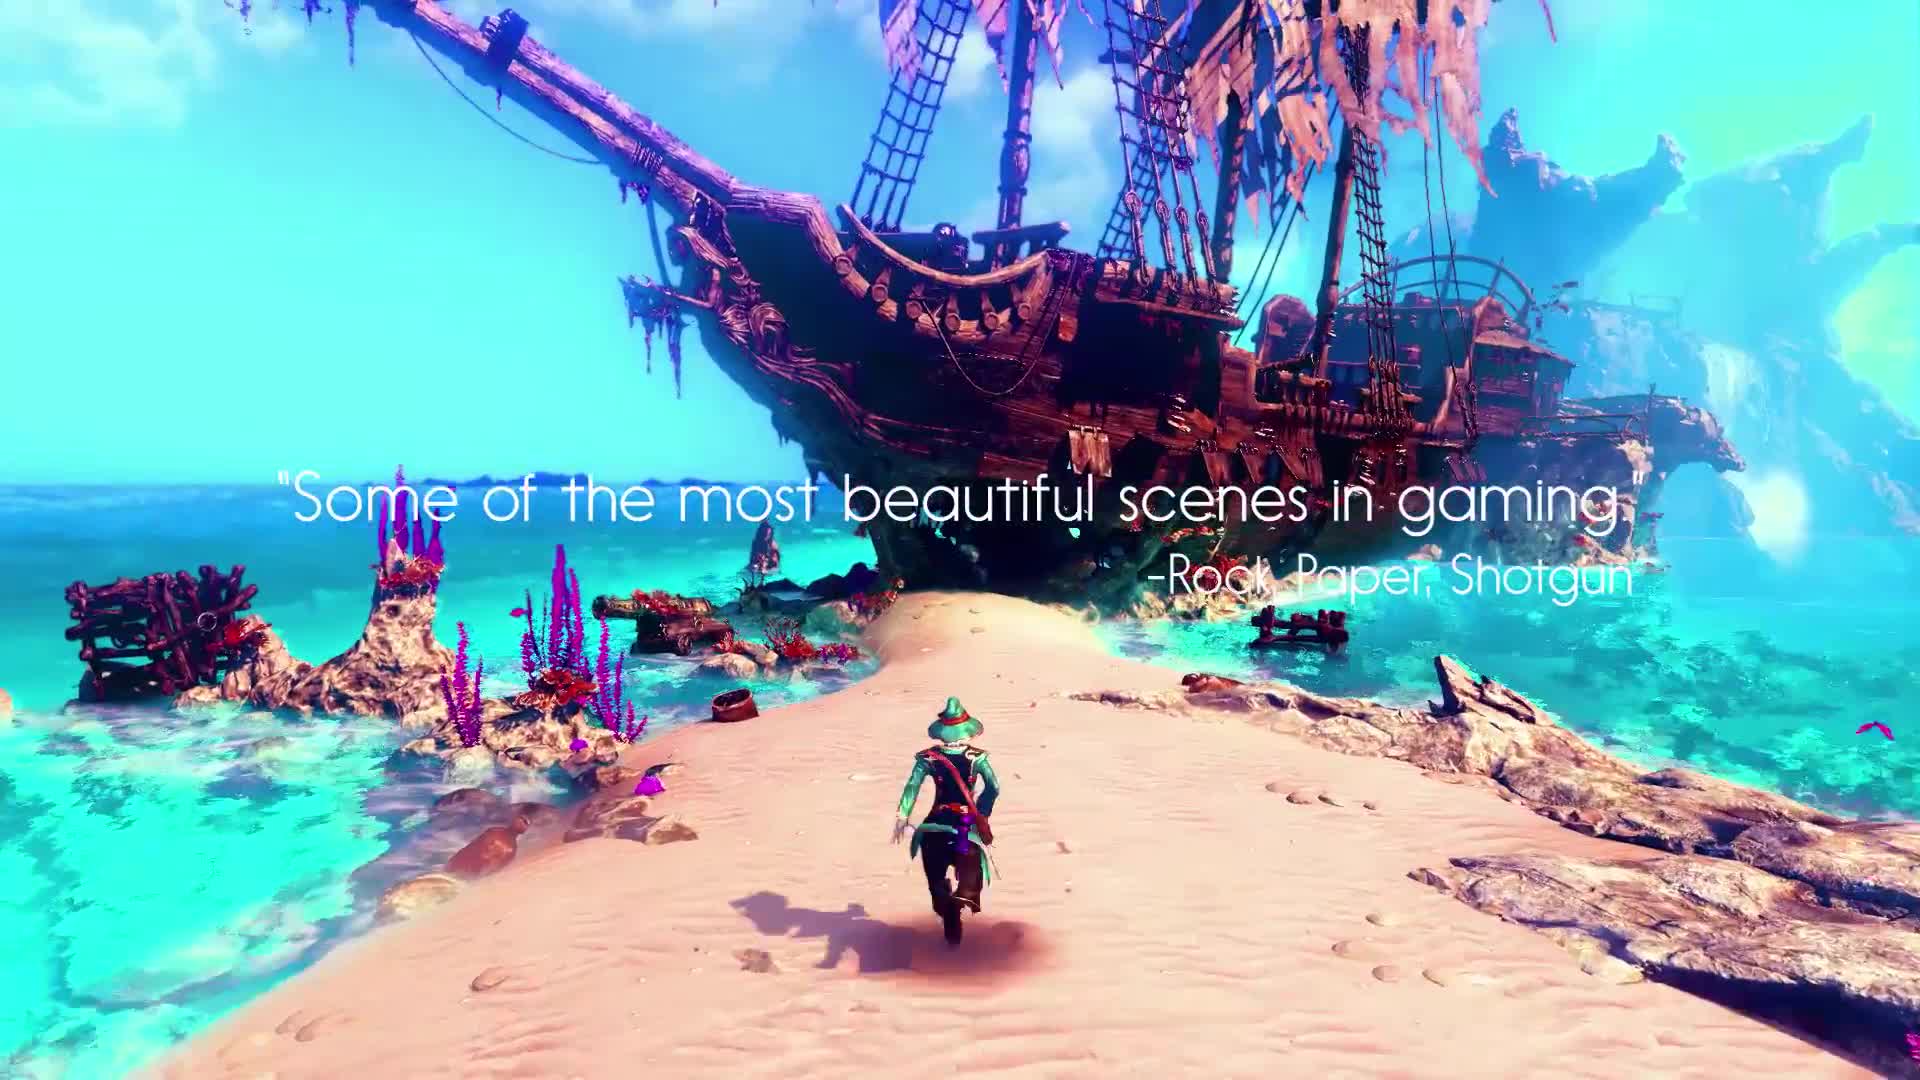 Trine 3: The Artifacts of Power - PS4 Trailer